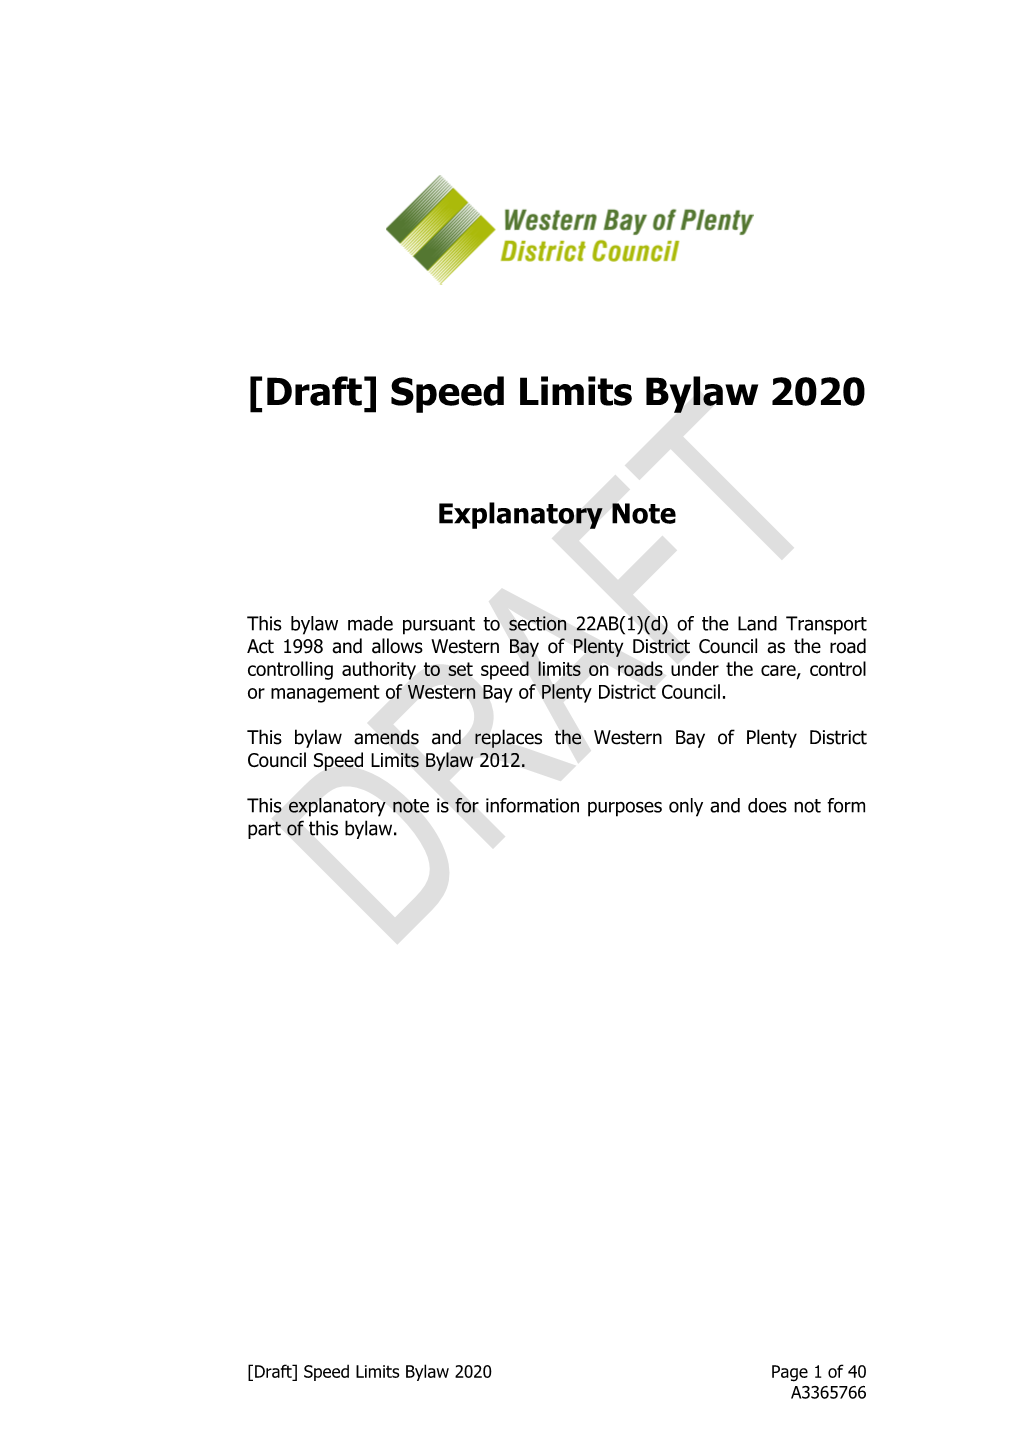 Item 9.2 Adoption of the Draft Speed Limits Bylaw 2020 for Consultation